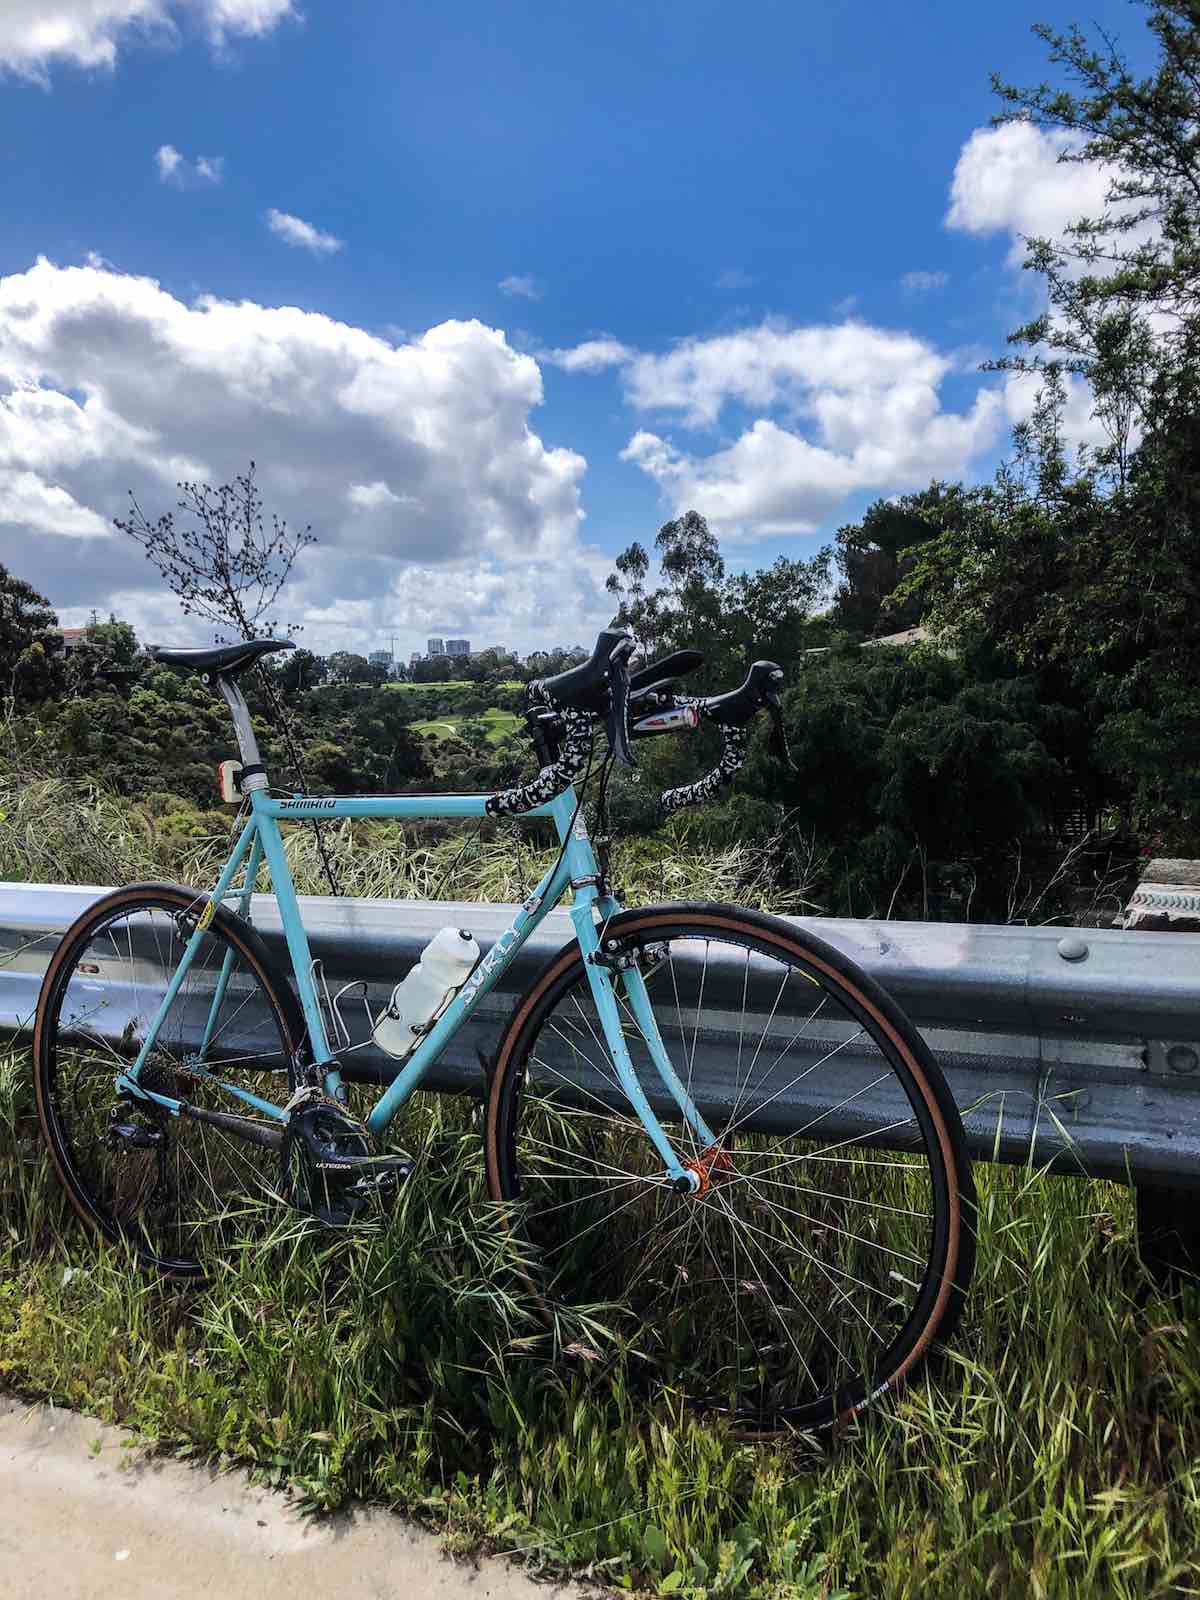 bikerumor pic of the day surly bicycle leaning against road barrier with vegetation and san diego skyline in the distance.